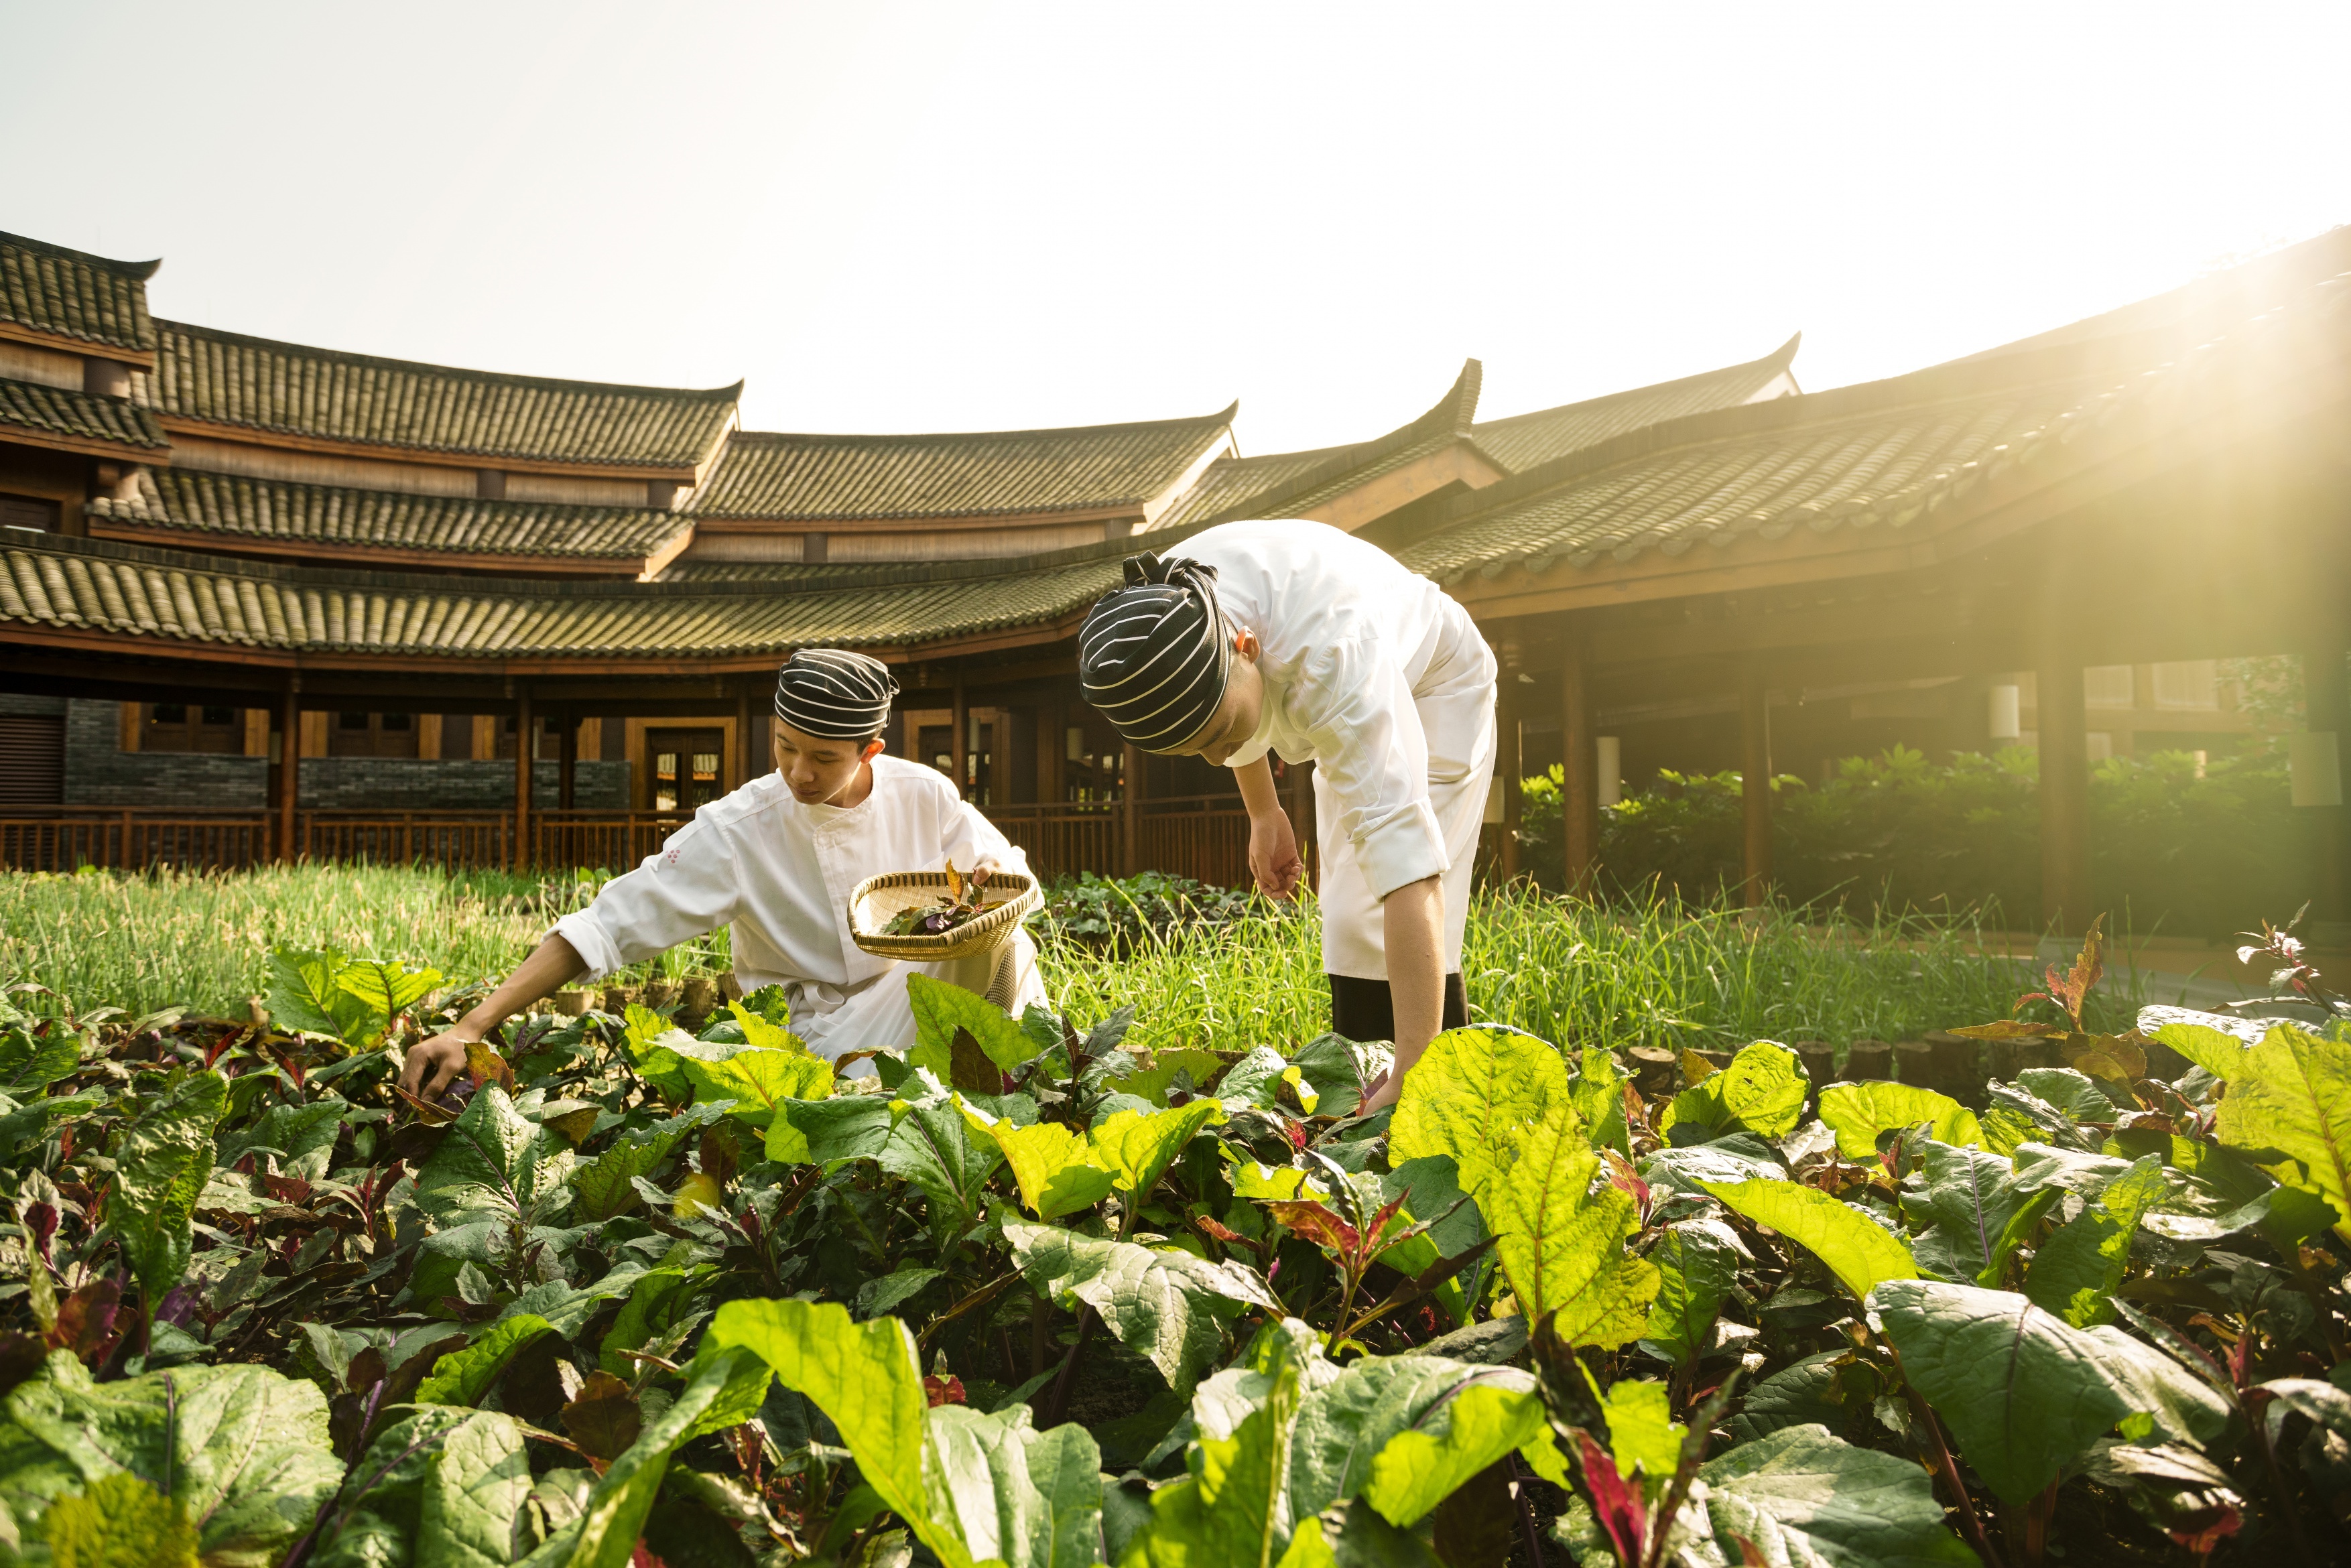 An organic farm is a main draw for Chinese guests at Six Senses new Qing Cheng Mountain resort in Sichuan. (Courtesy Photo)